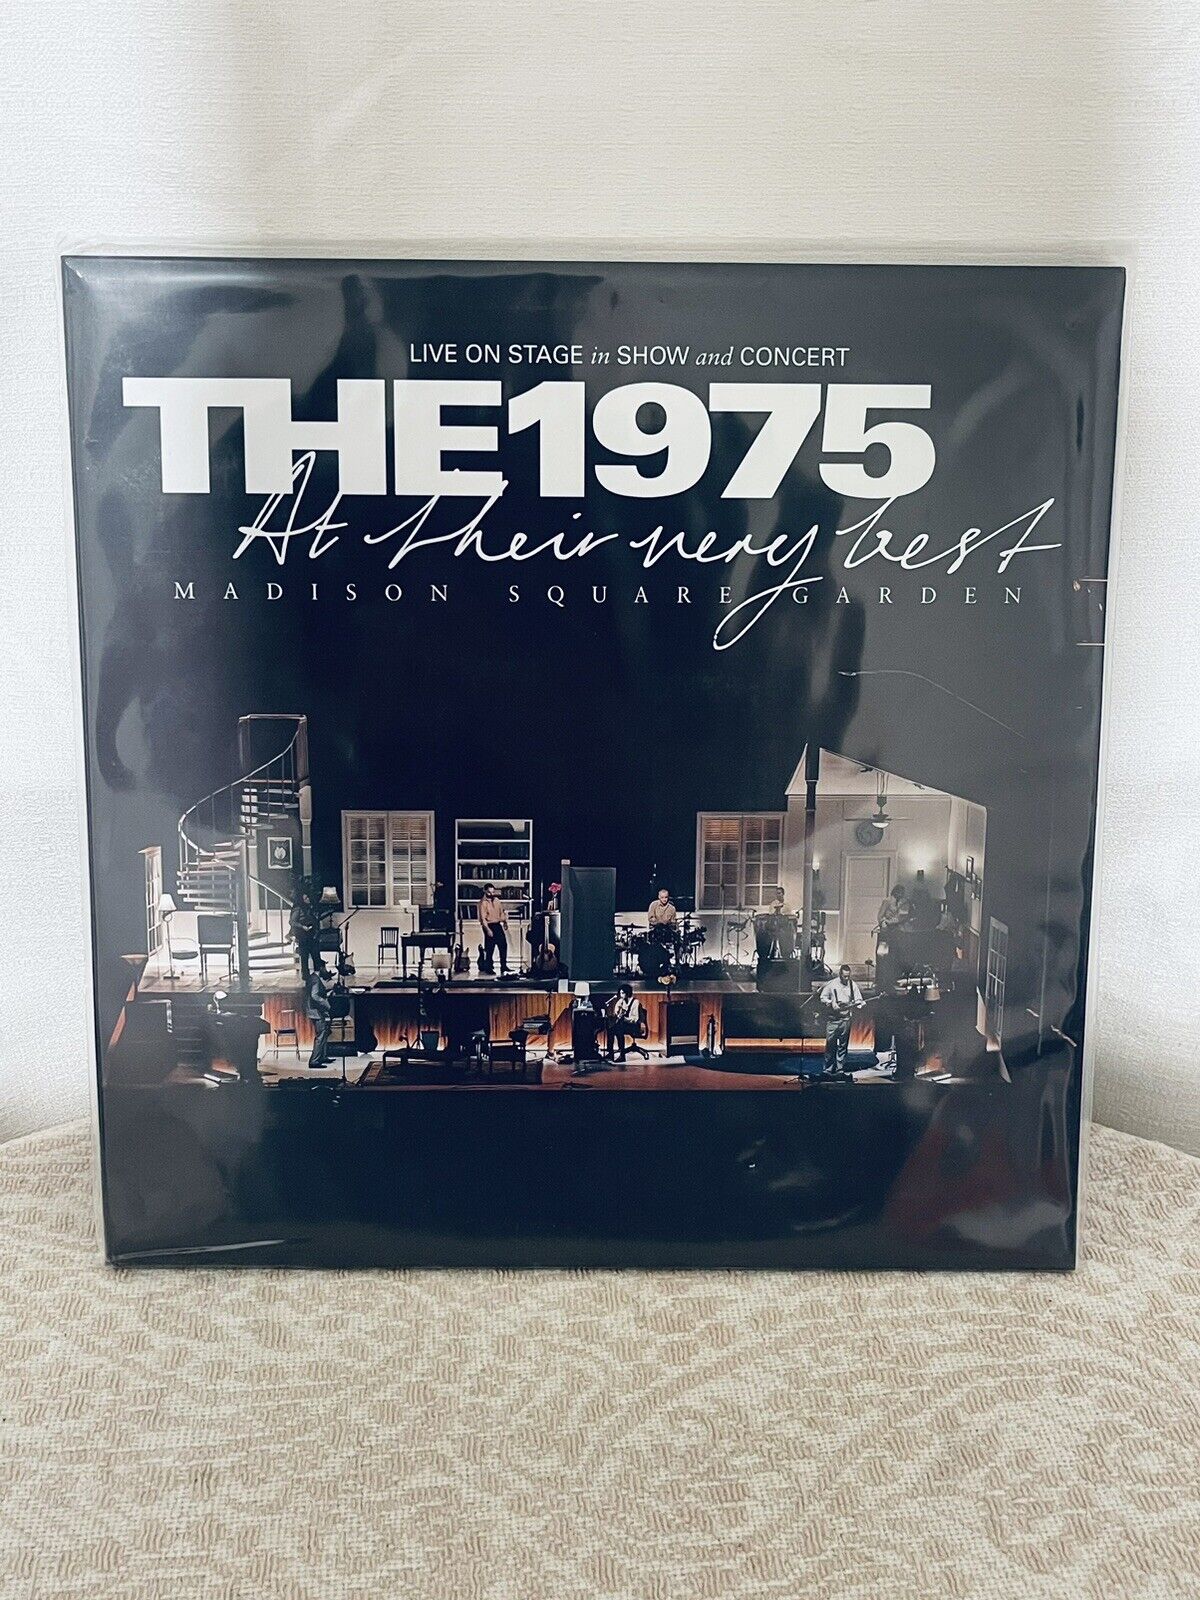 NEW The 1975 At Their Very Best (Live Madison Square Garden) Limited Clear Vinyl